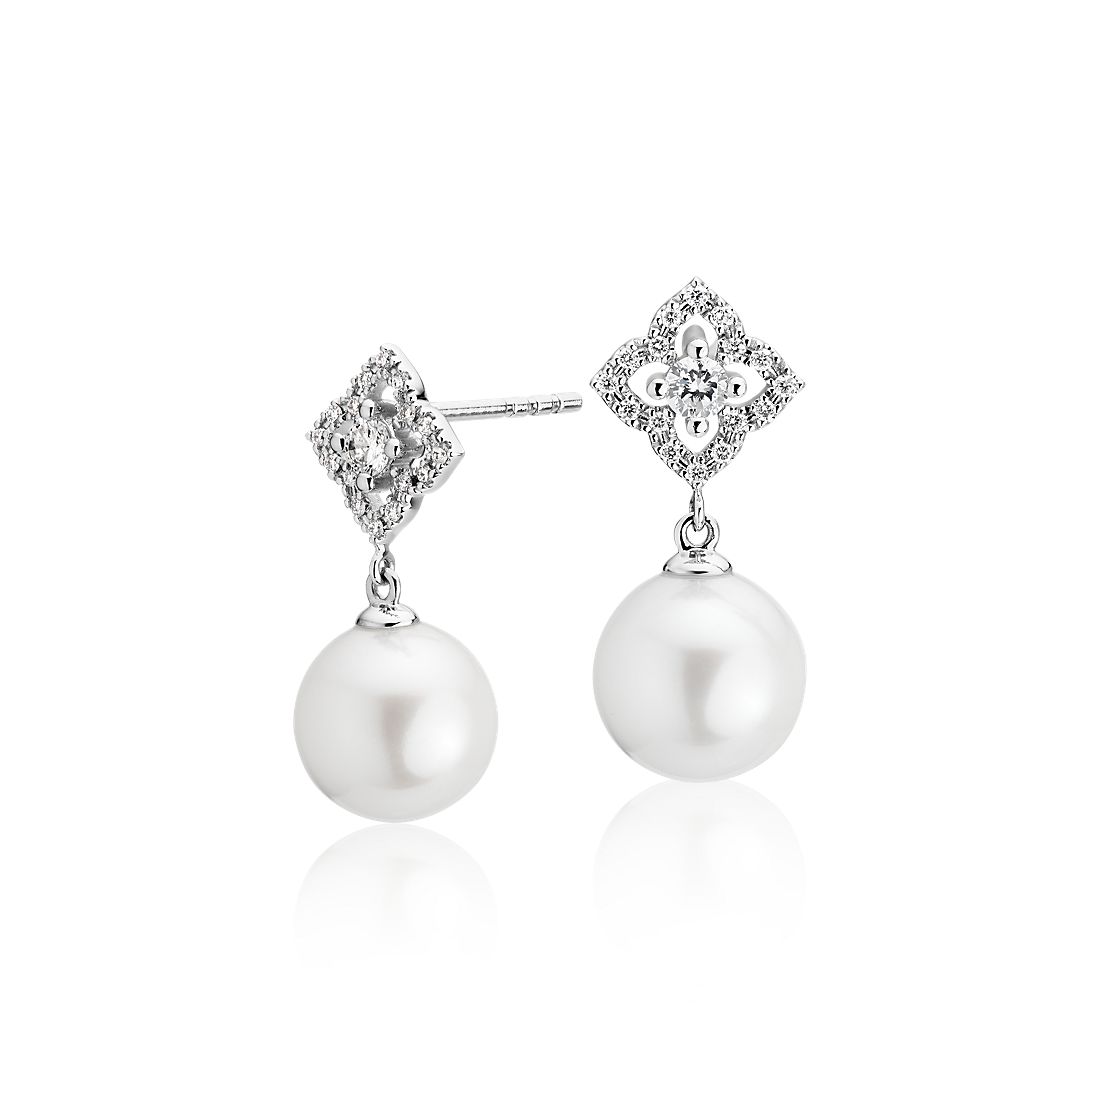 Petite Floral Freshwater Cultured Pearl and Diamond Earrings in 14k White Gold